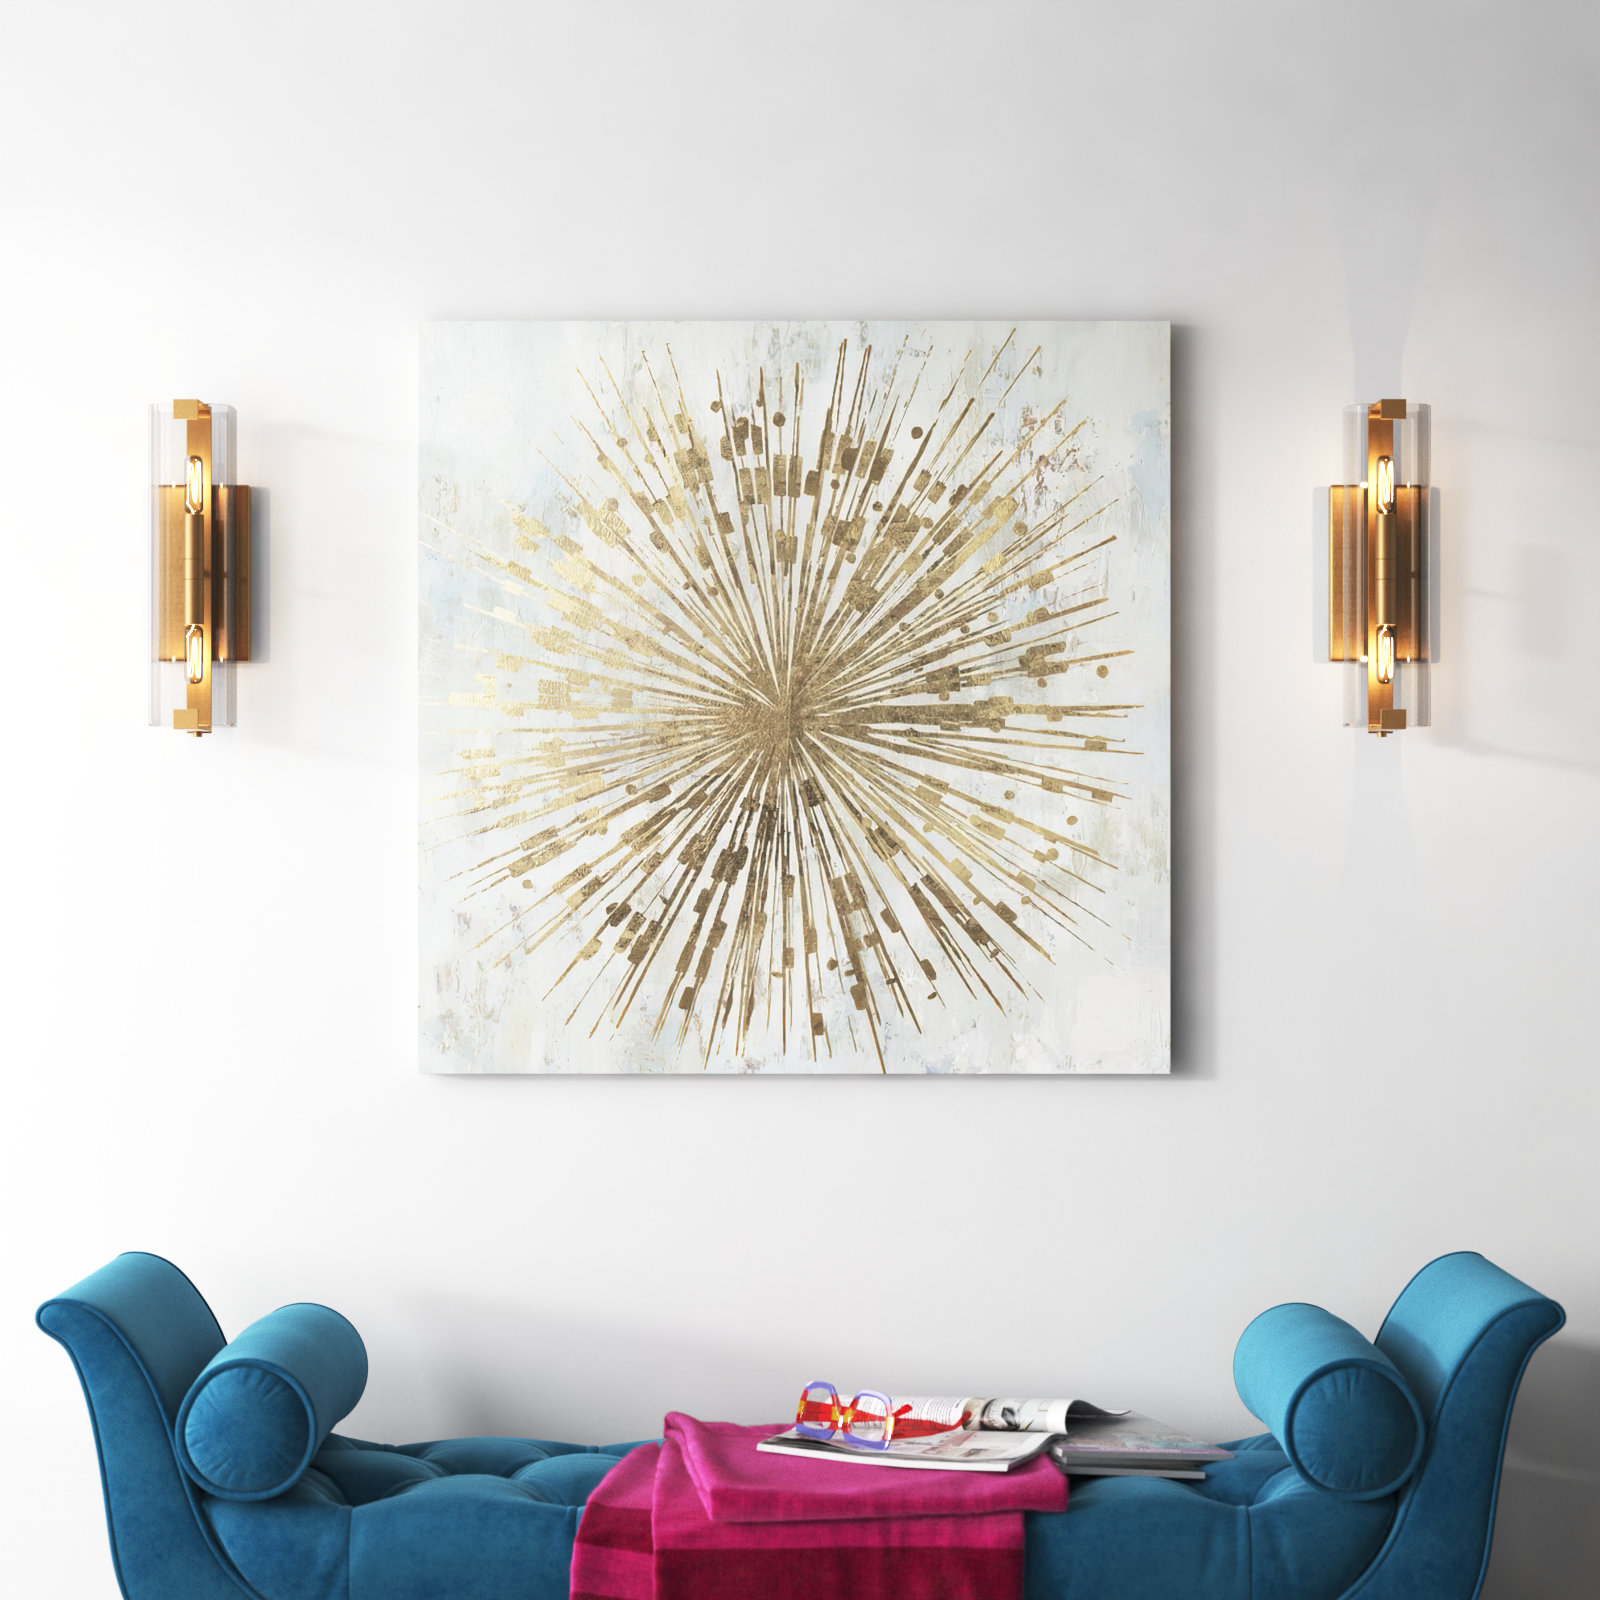 Etta Avenue™ Golden Star Framed On Canvas by Tom Reeves Painting  Reviews  Wayfair